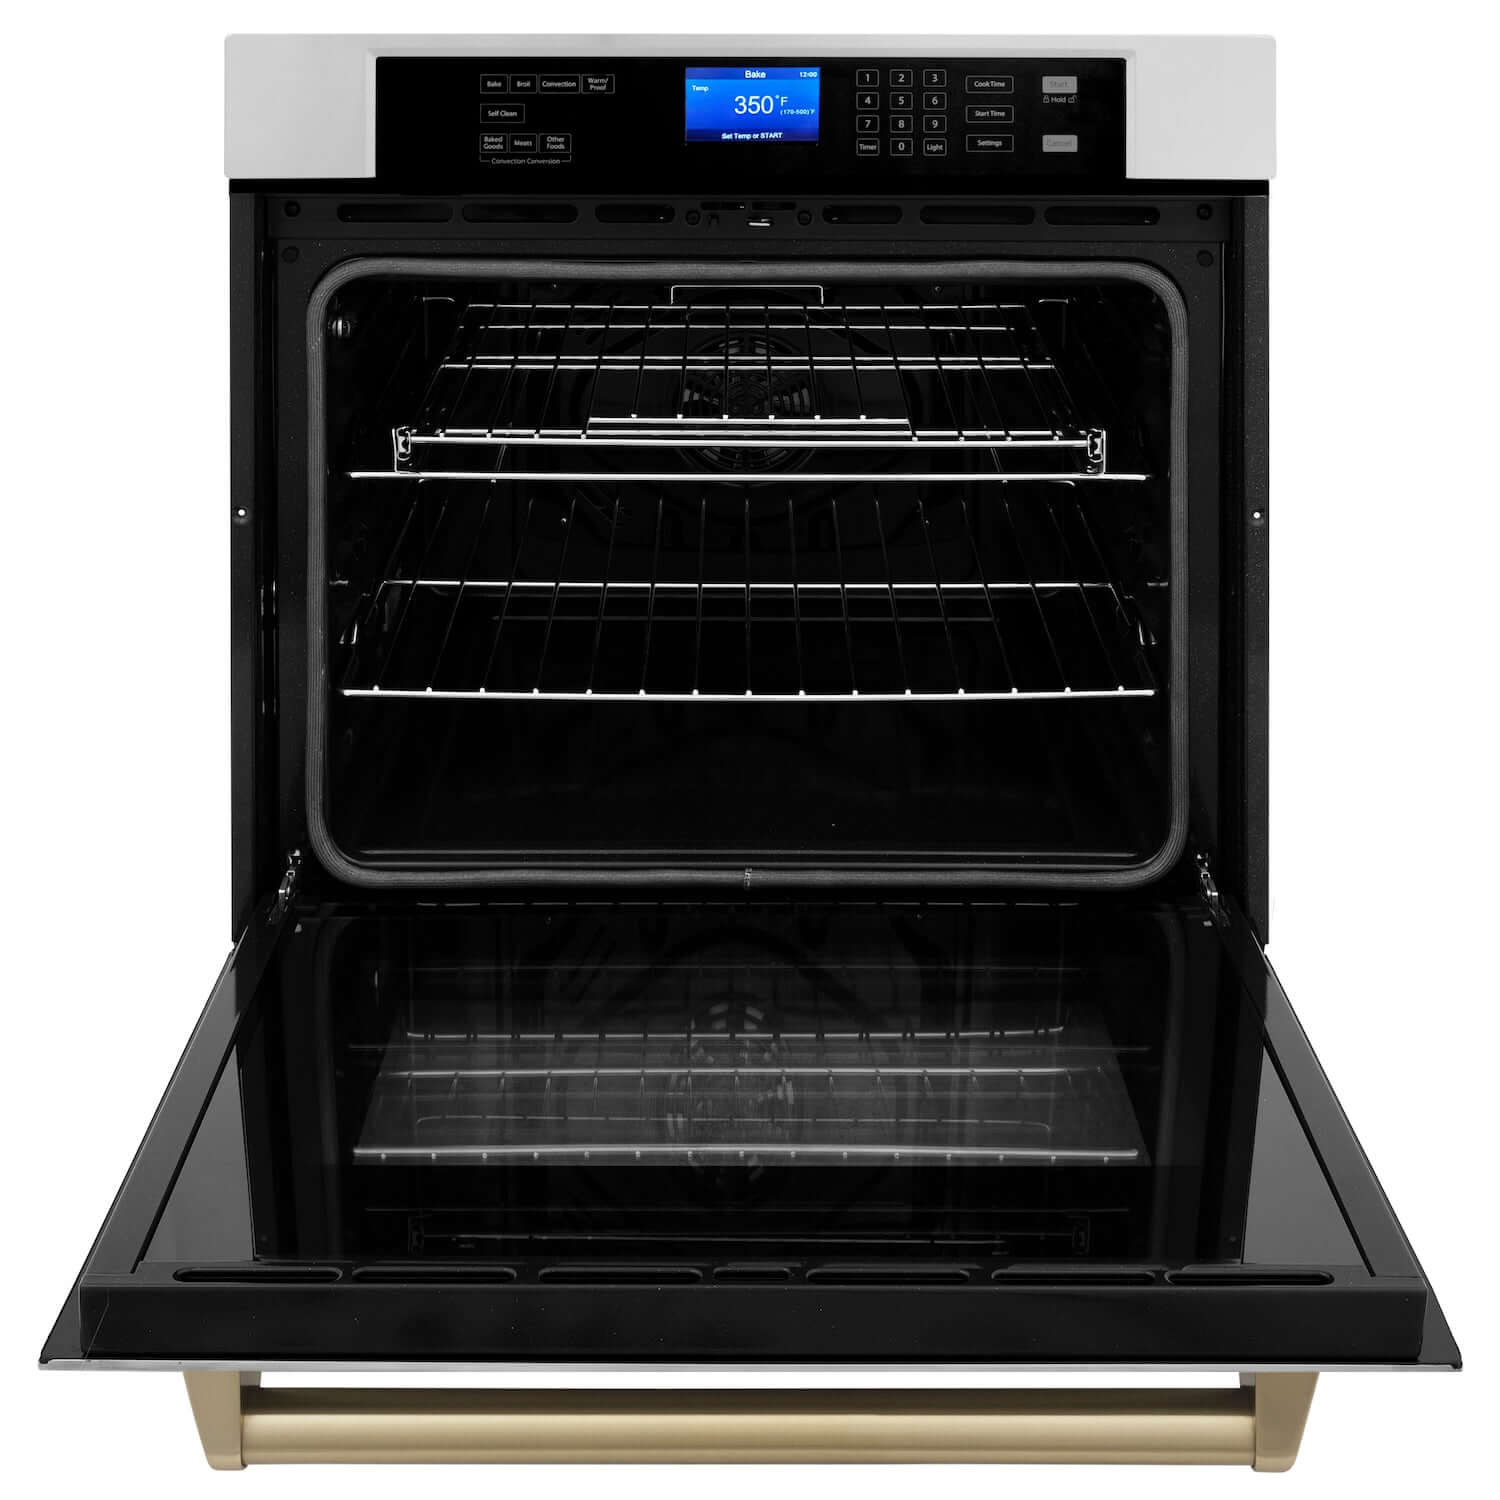 ZLINE Autograph Edition 30 in. Electric Single Wall Oven with Self Clean and True Convection in Stainless Steel and Champagne Bronze Accents (AWSZ-30-CB)